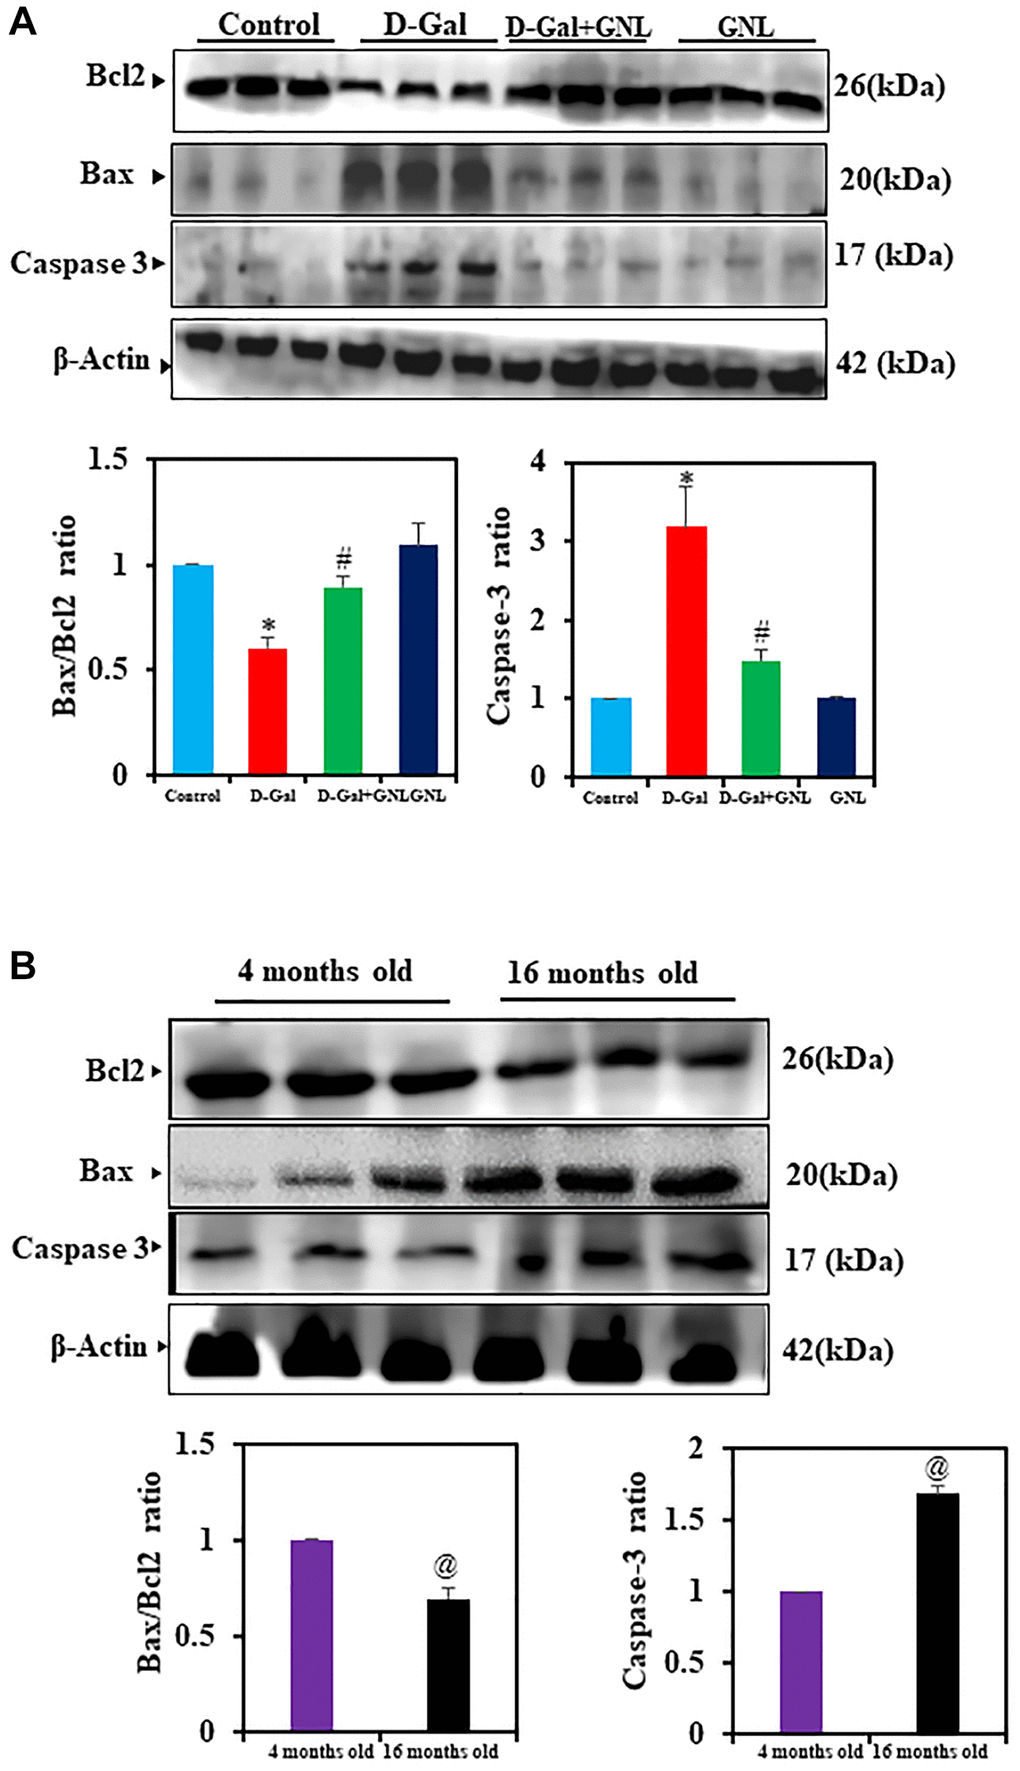 The GNL attenuated excessive apoptosis in the mice’s hippocampus. (A) The BCl2, BAX, and caspase-3 protein levels were analyzed by Western blot. Three independent experiments are shown here. SDS-PAGE resolved the protein from each sample, and Western blots were done. The internal load controllers were β-actin. Densitometry analysis calculated changes in protein bands as 1.0-fold, as shown below the gel. (B) 4-month-old young control and 16-month-old mice hippocampus tissue were analyzed for BCl2, BAX, and caspase-3. The internal load controllers were β-actin. Densitometry analysis calculated changes in protein bands as 1.0-fold, as shown below the gel. Values are expressed as the mean ± SD (n = 6). *P #P @P 